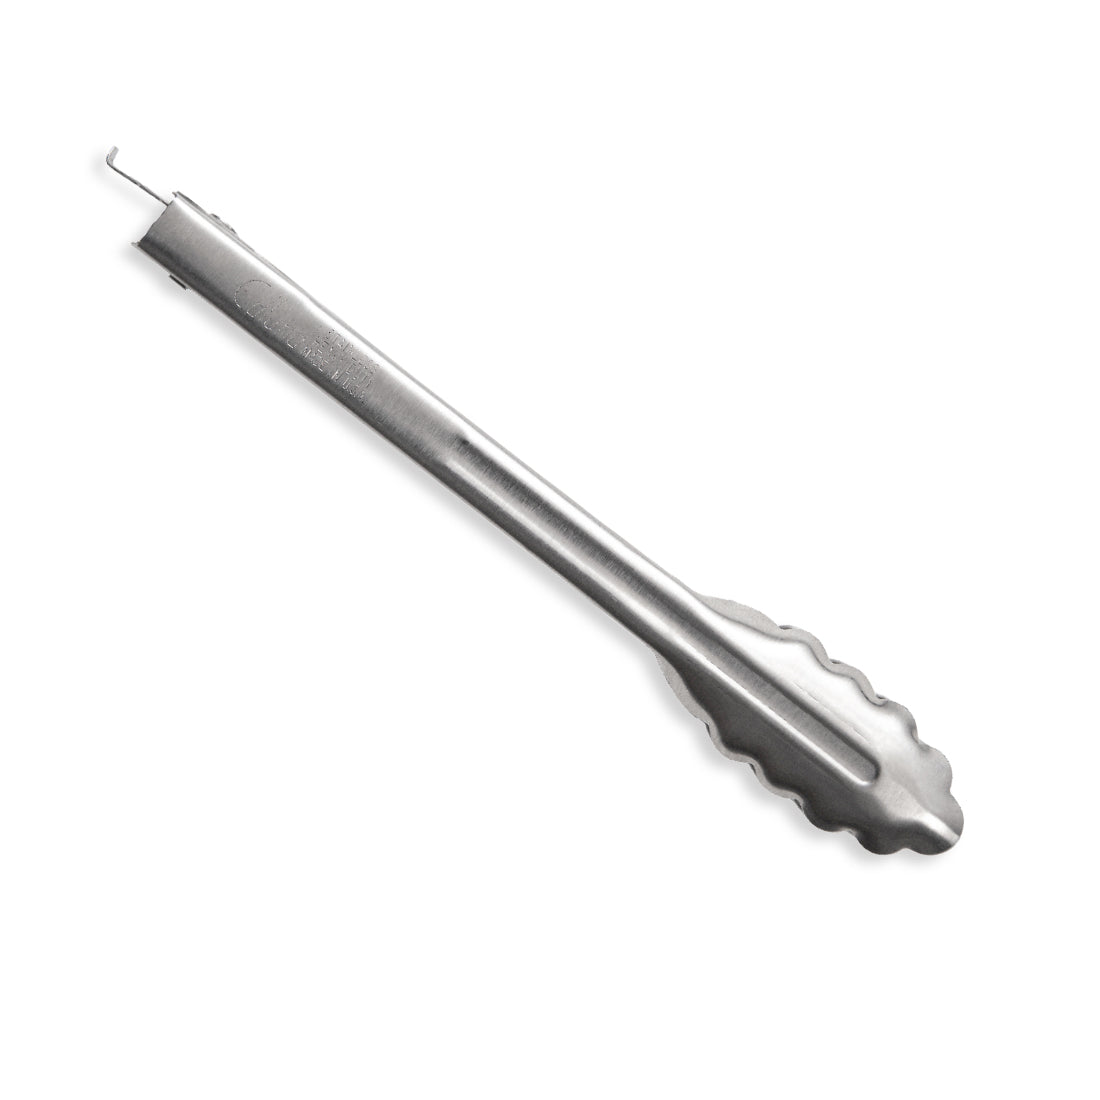 9 Heavy Duty Stainless Tong